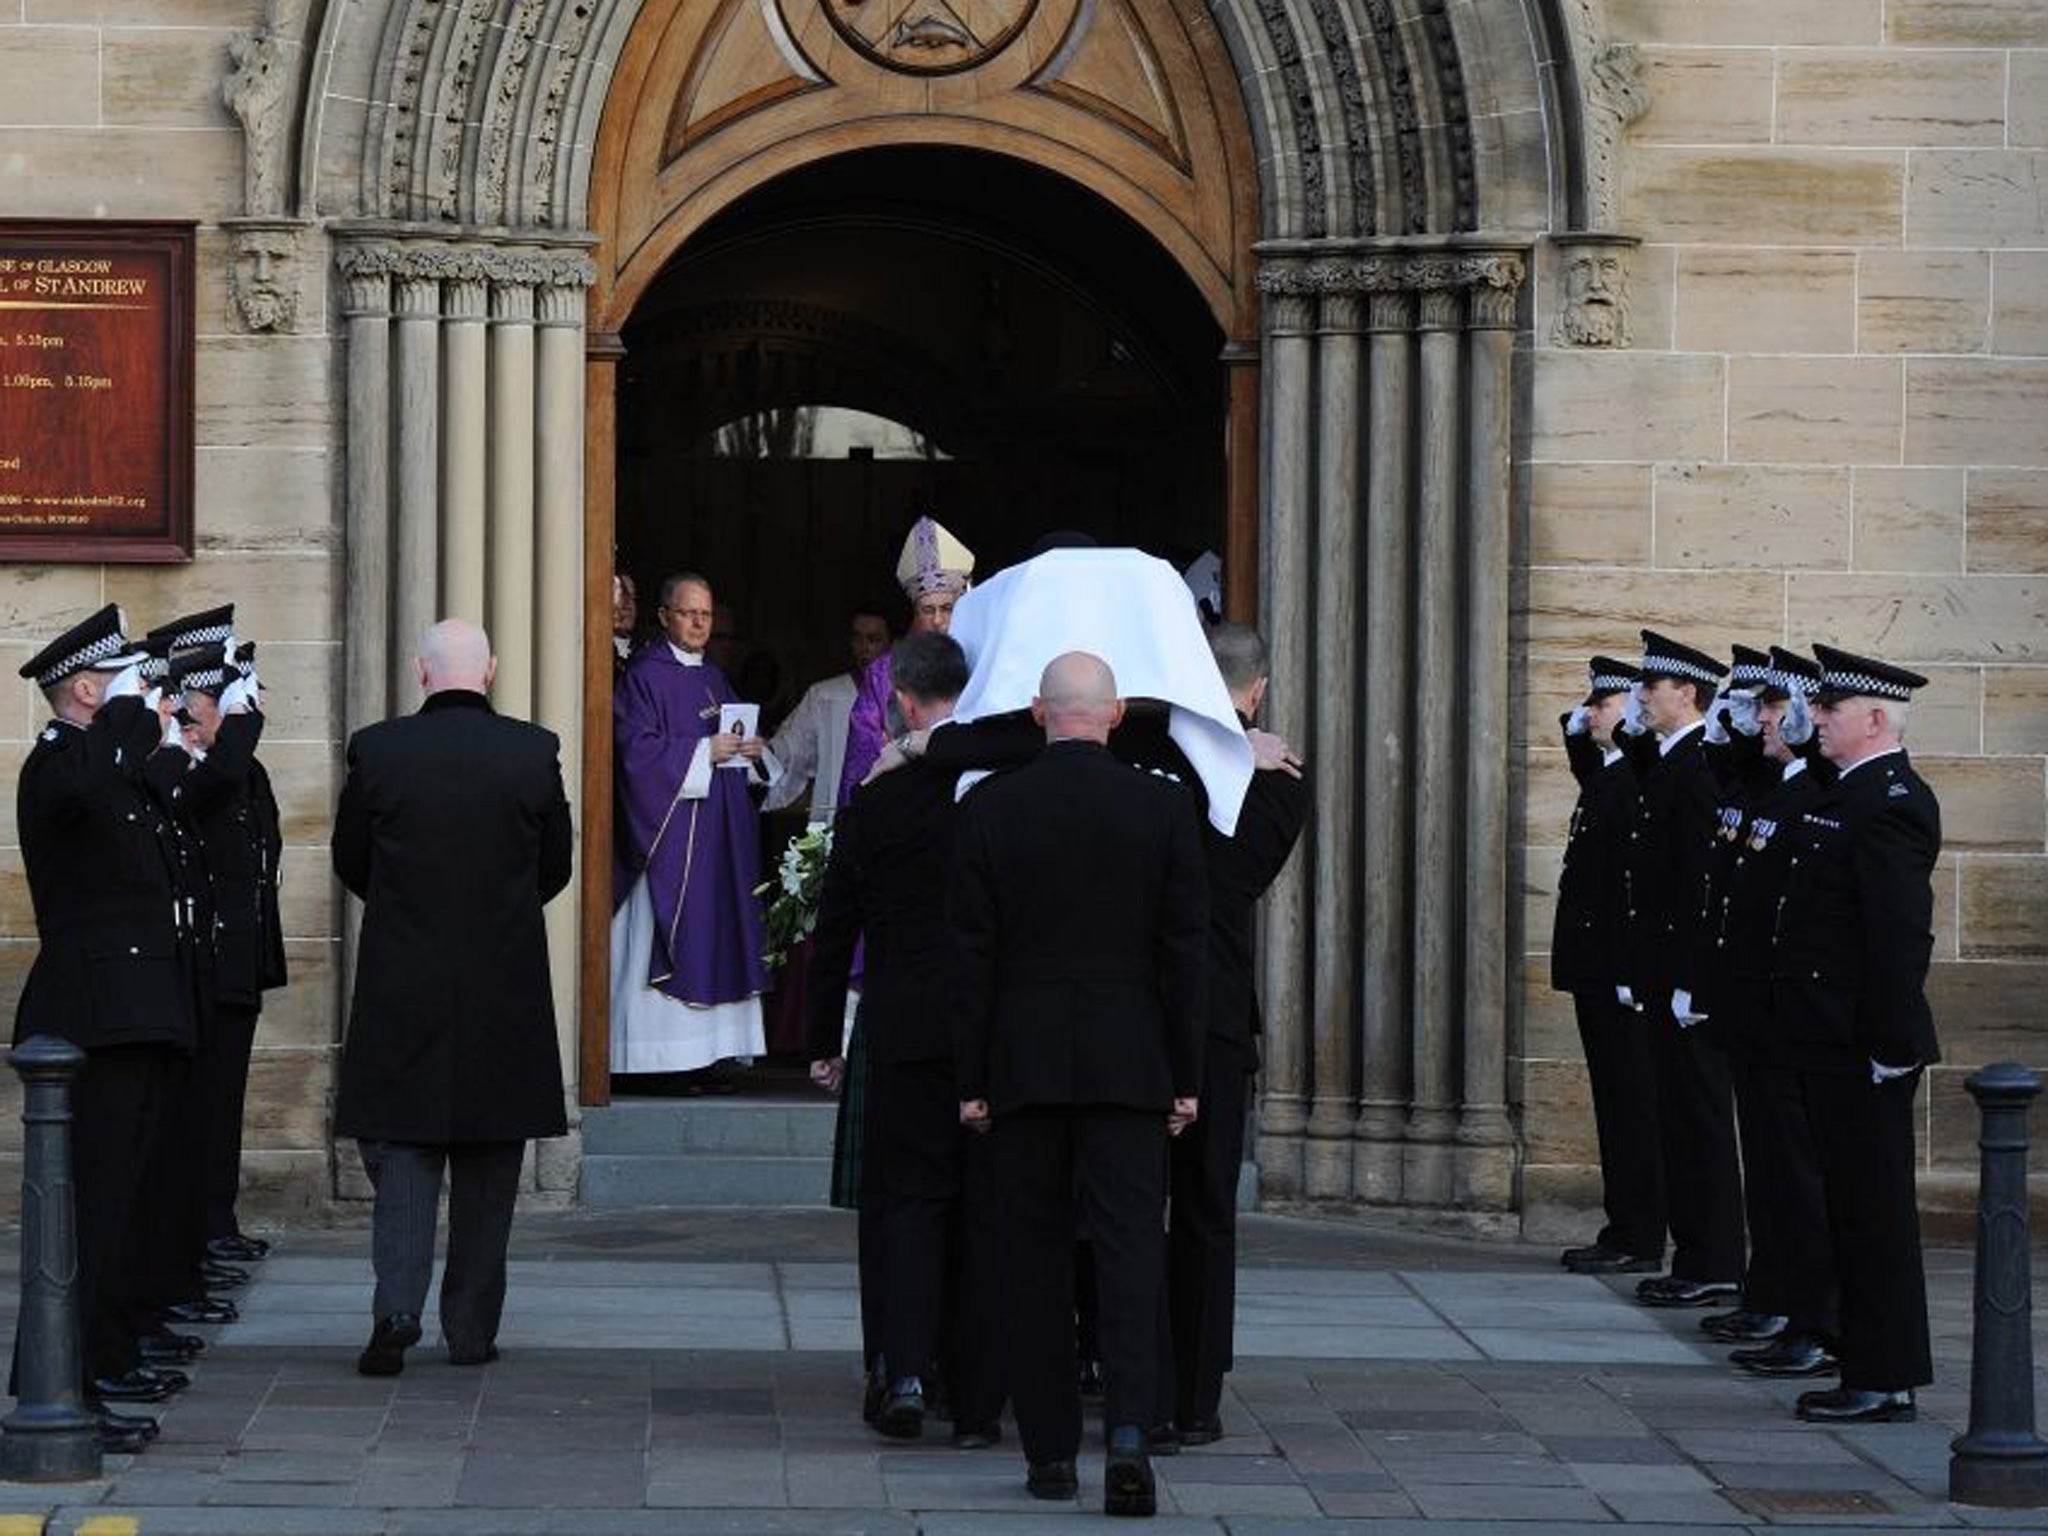 The body of Pc Kirsty Nelis is carried into St Andrews Cathedral during her funeral in Glasgow after a police helicopter crashed